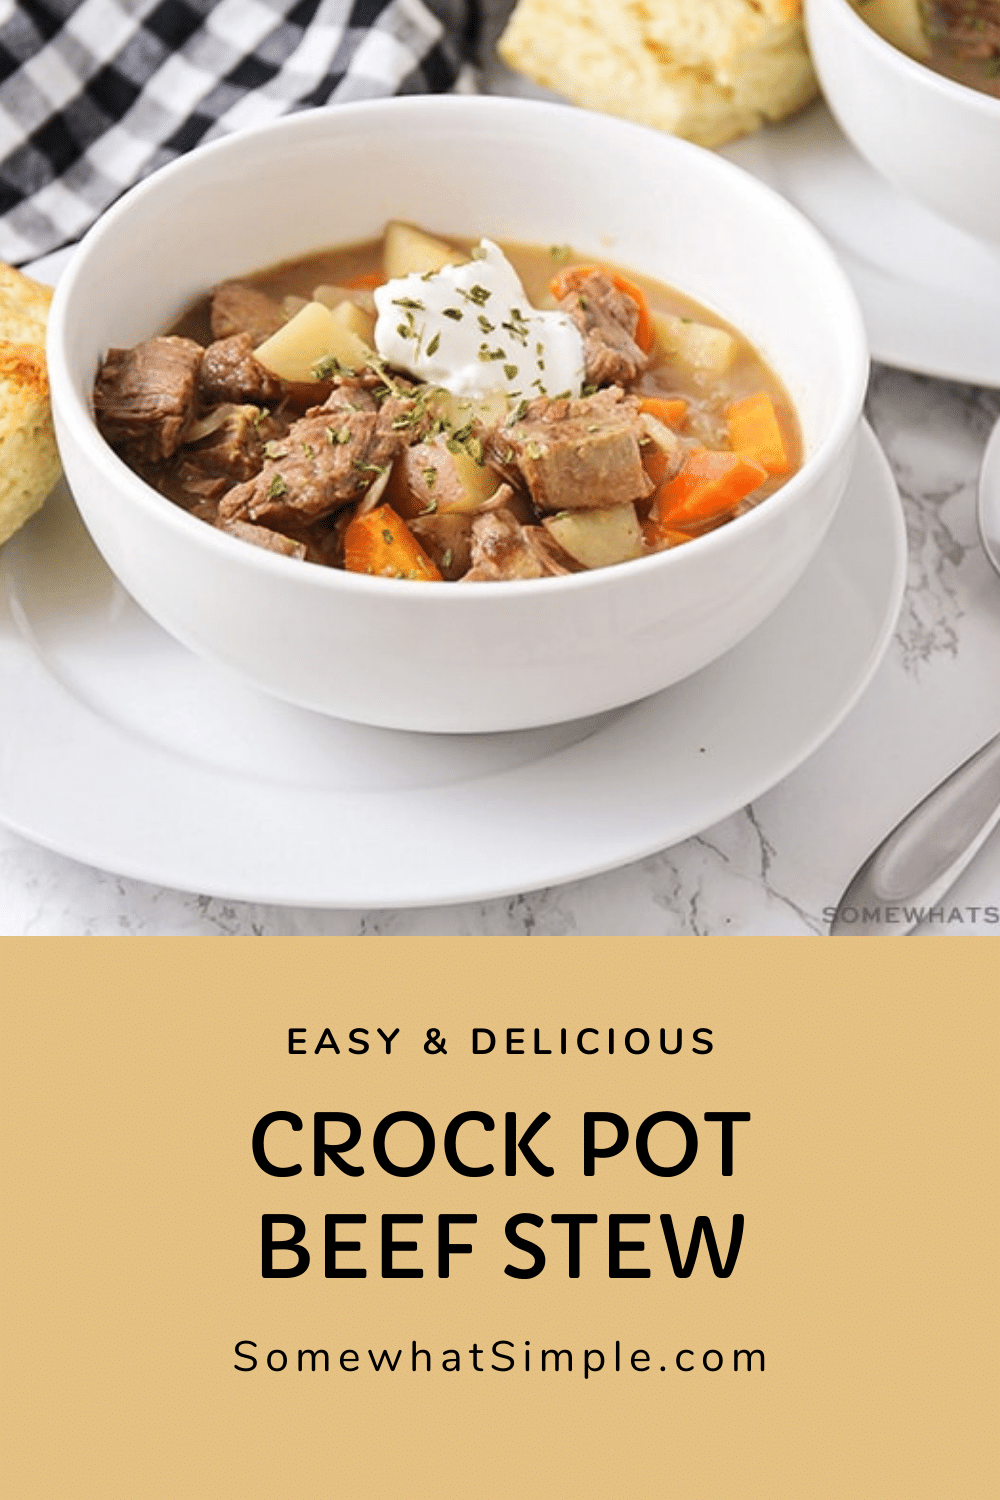 This crock pot beef stew is a savory recipe that is the perfect comfort-food meal.  Made in a slow cooker all day until the beef is incredibly tender and hearty vegetables are bursting with flavor! This dinner recipe is so easy to make, you can enjoy it all year long! via @somewhatsimple